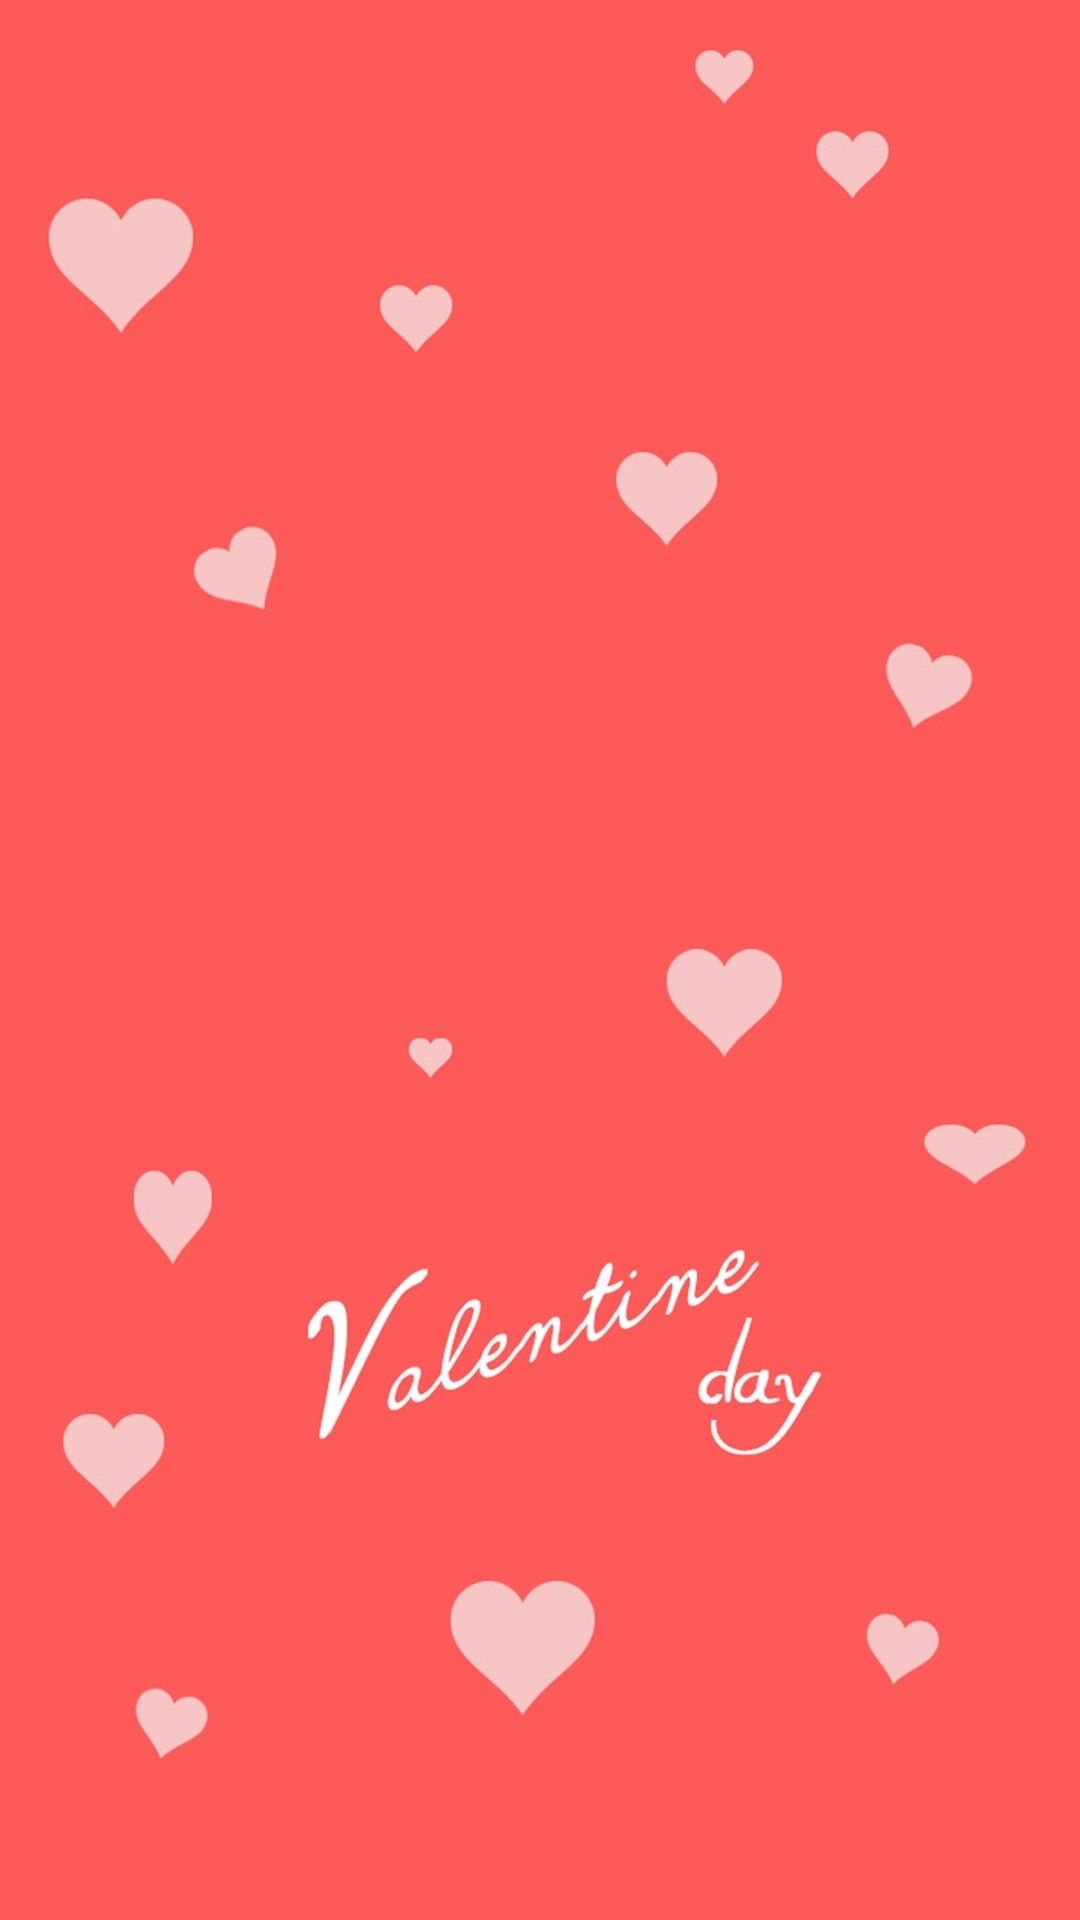 Valentine Day iPhone Wallpaper Background iPhone Wallpaper. Valentines wallpaper, Android wallpaper, Happy valentines day quotes